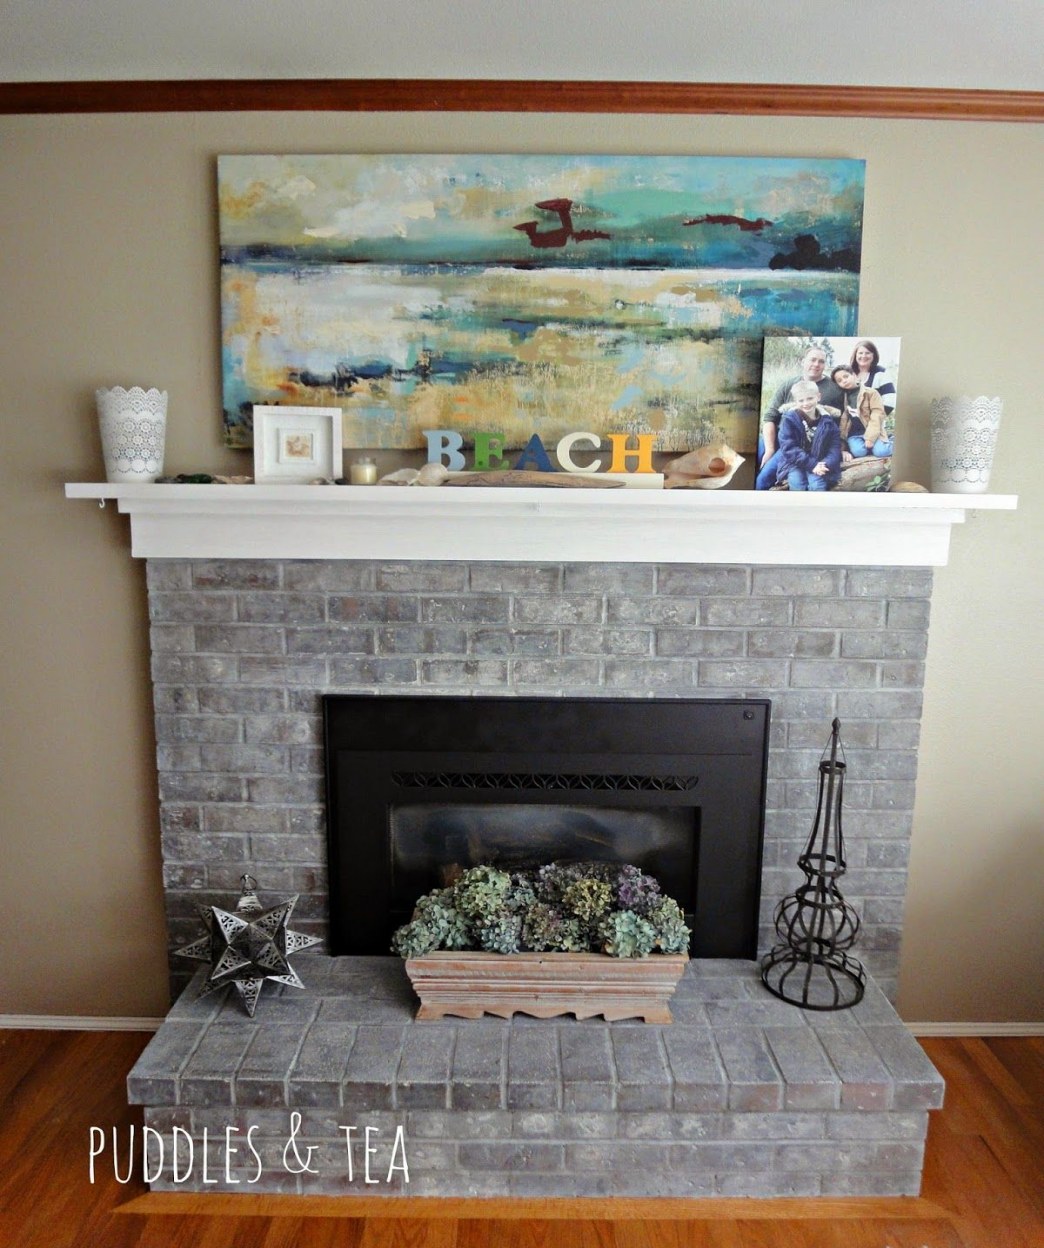 Built In Fireplace Ideas Awesome White Washed Brick Fireplace Puddles & Tea White Wash Brick